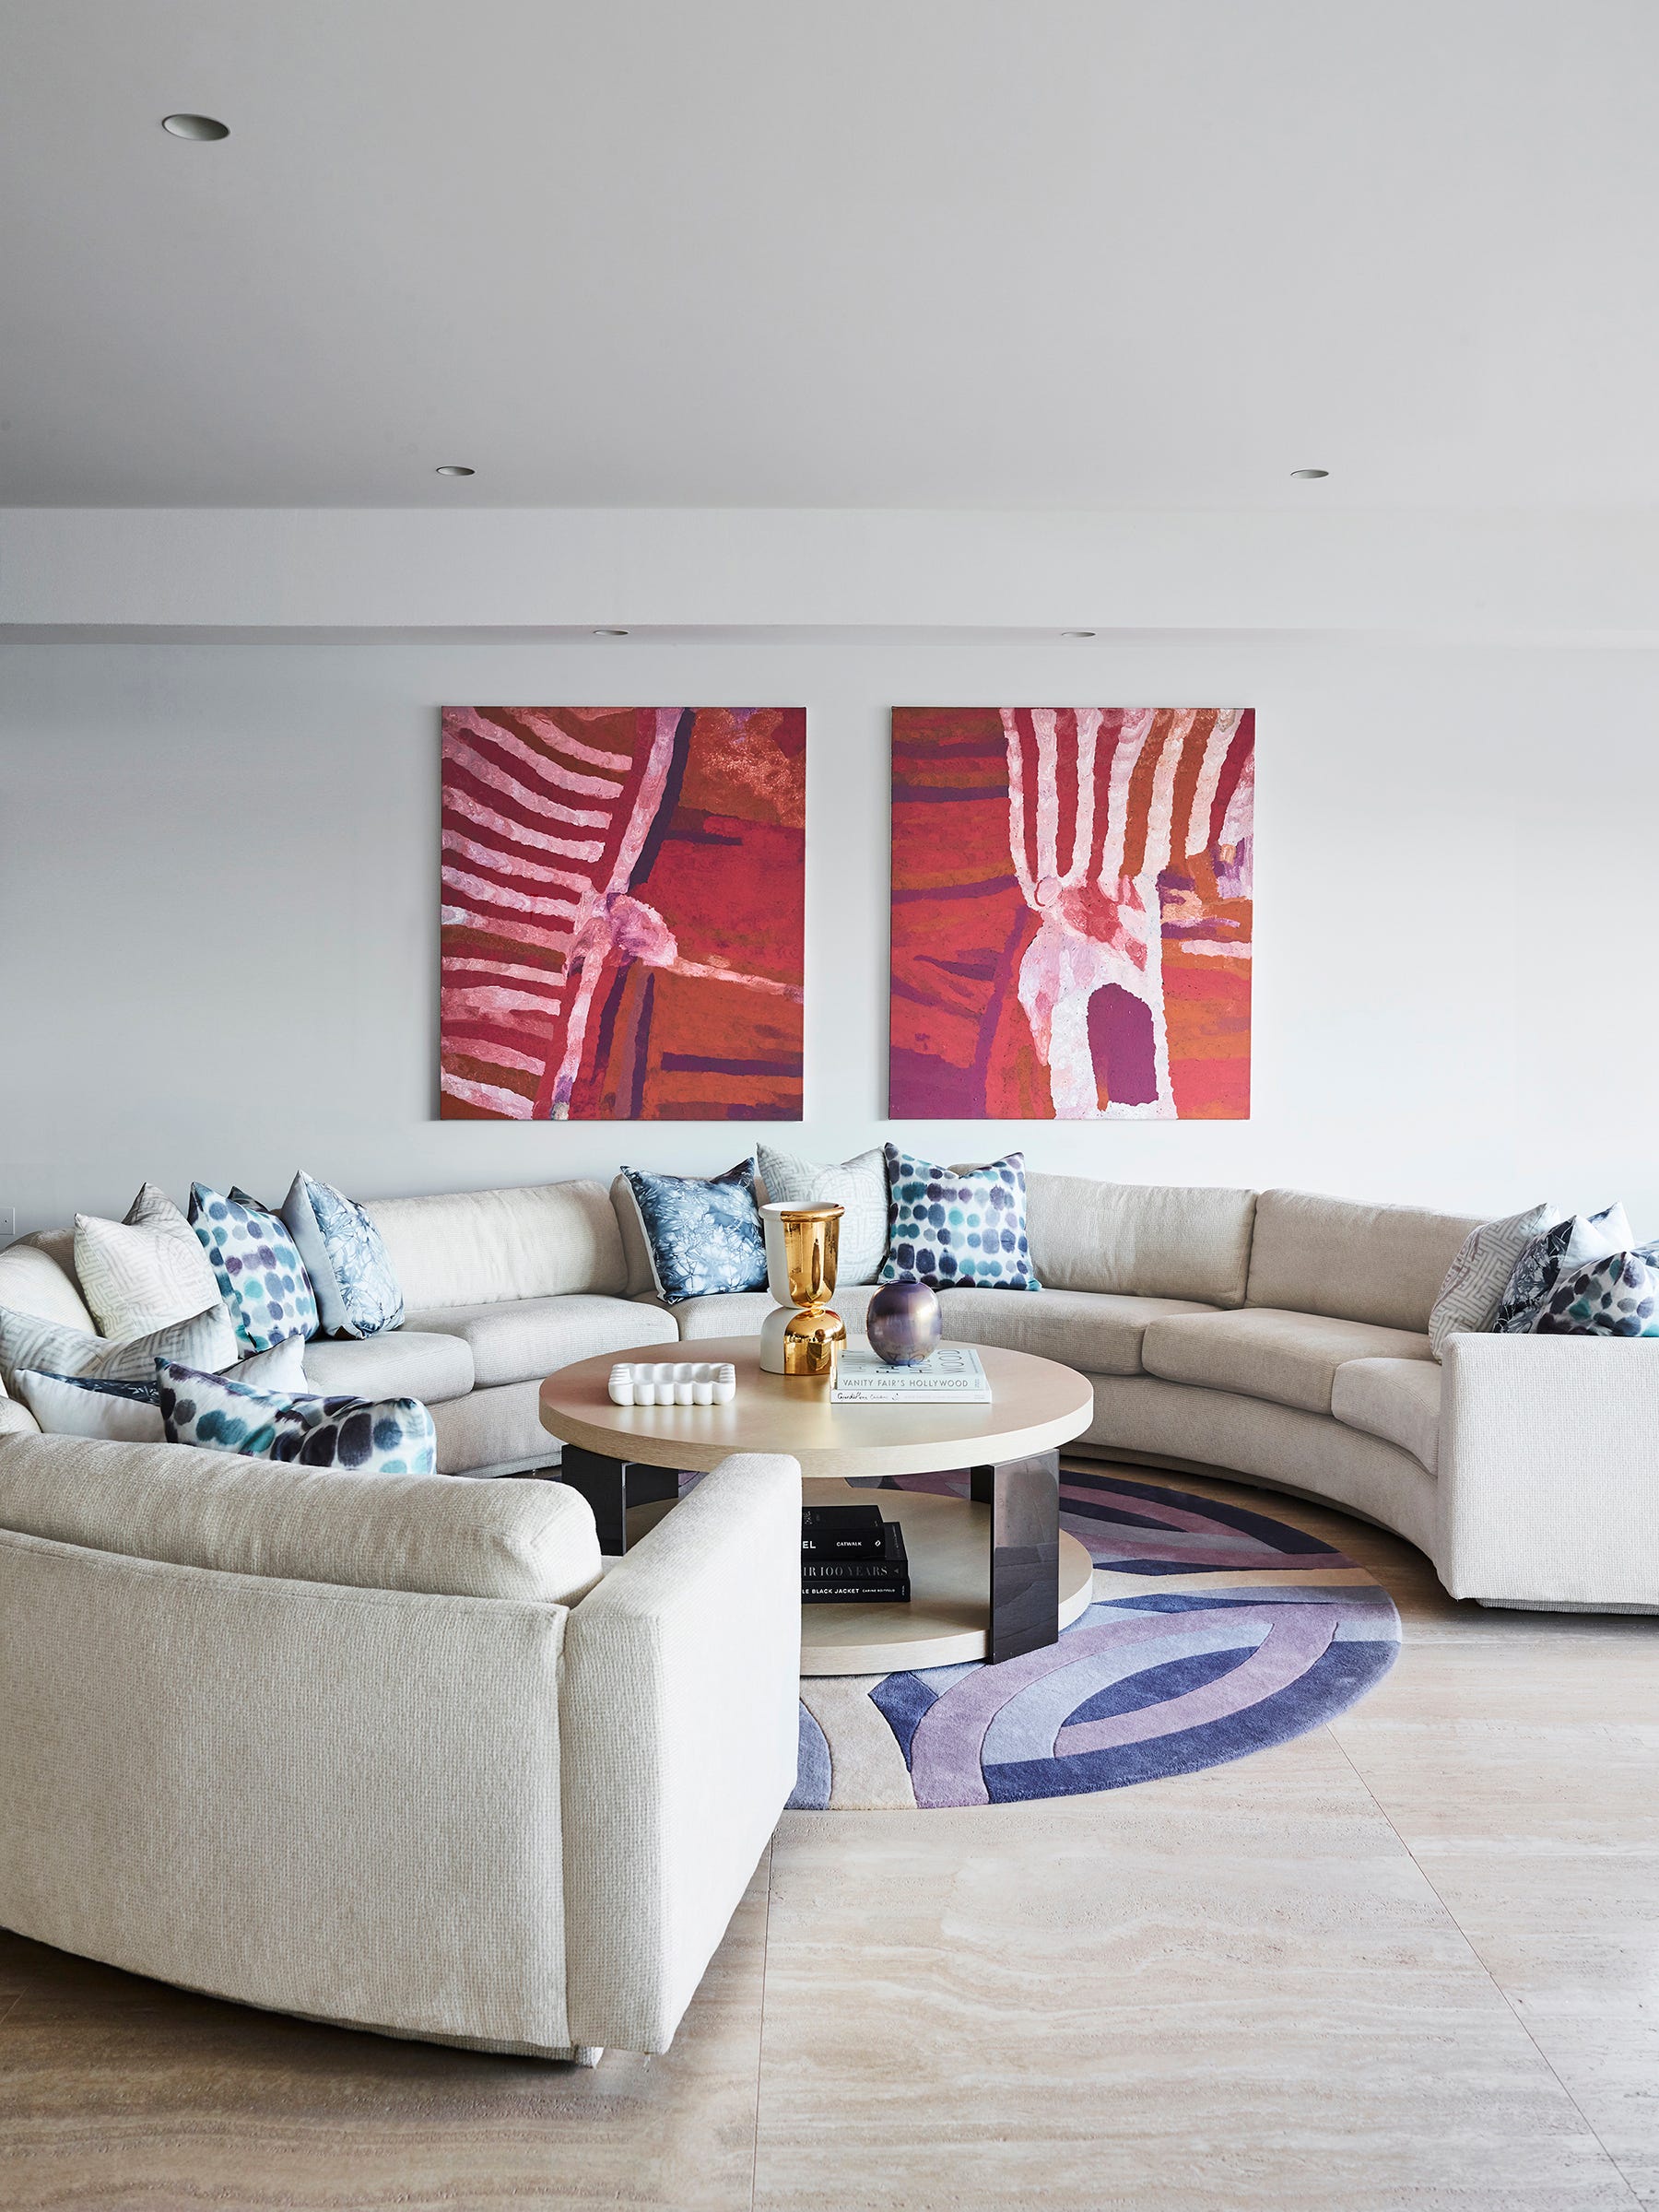 A sculpted circular rug punctuated by shades of lavender follows the form of a curved sofa, accented with pillows in shades of blue. Adding a jolt in color and pattern is a pair of paintings by the indigenous Australian artist Biddee Baadjo.